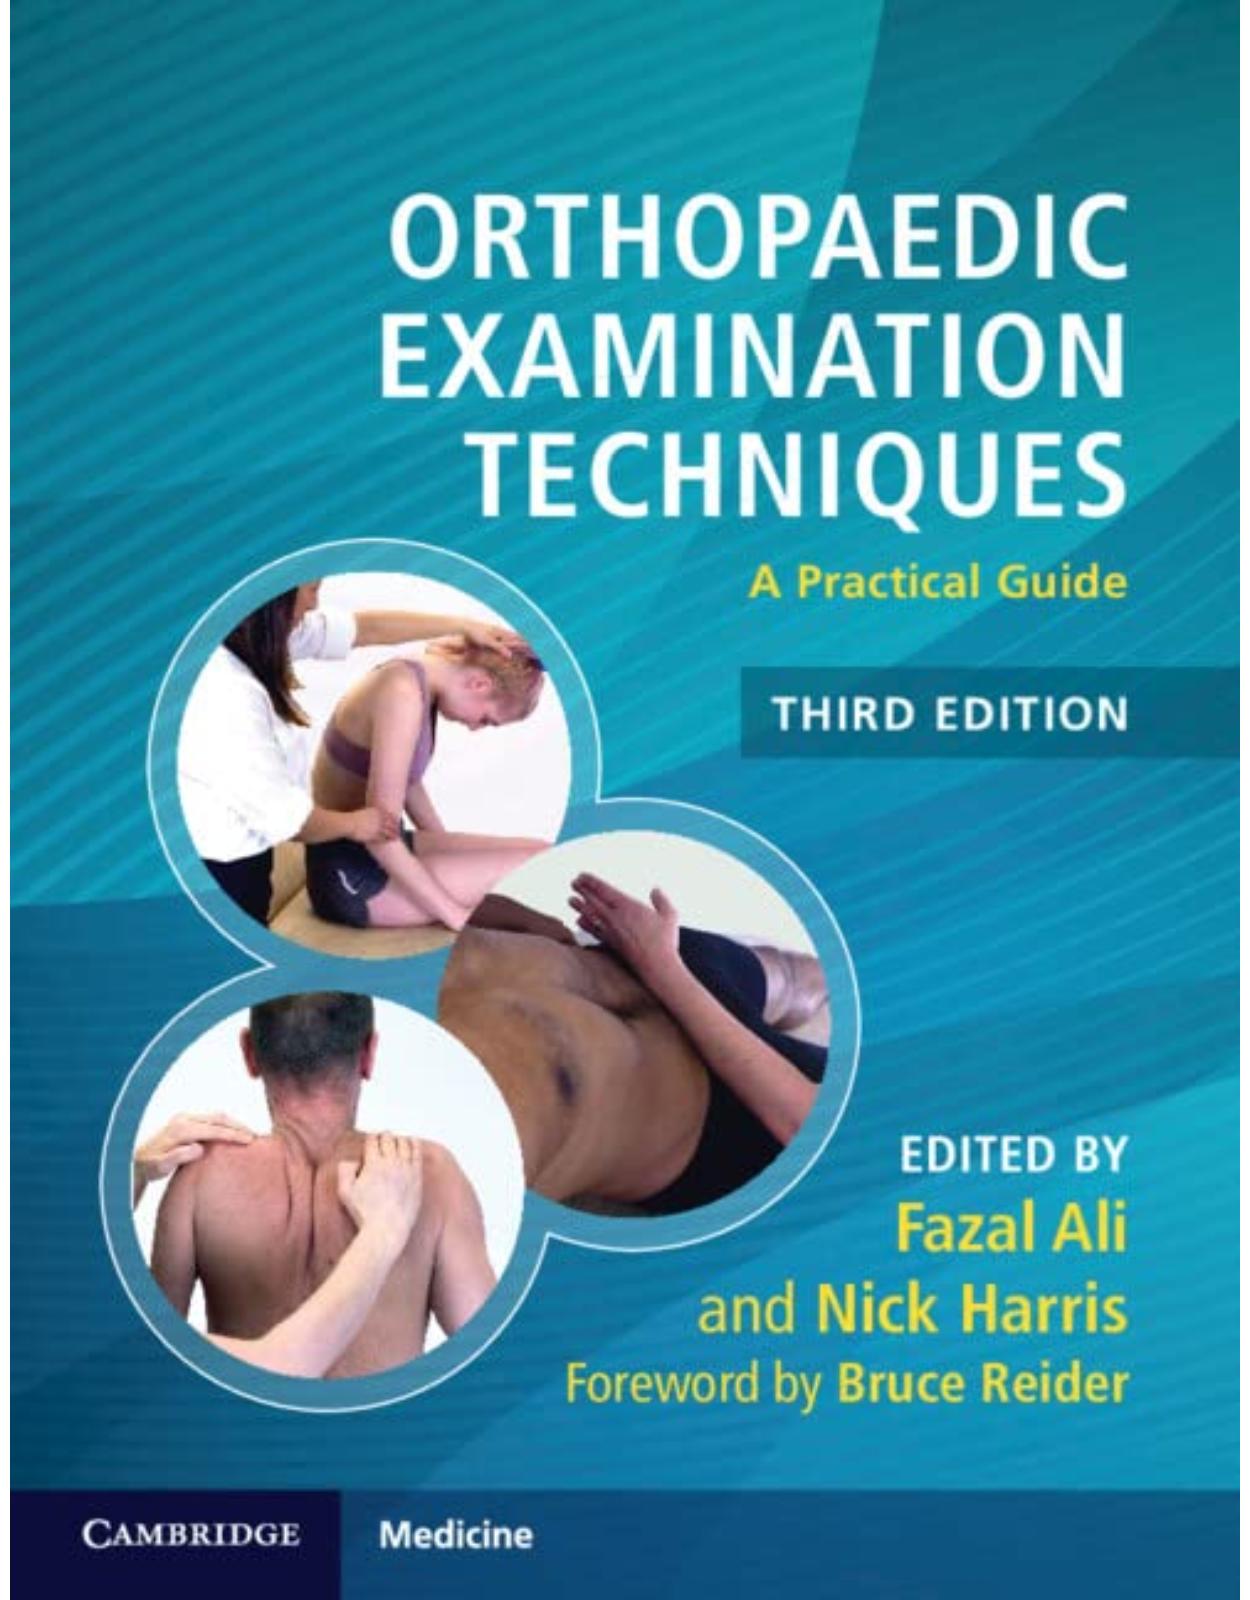 Orthopaedic Examination Techniques: A Practical Guide 